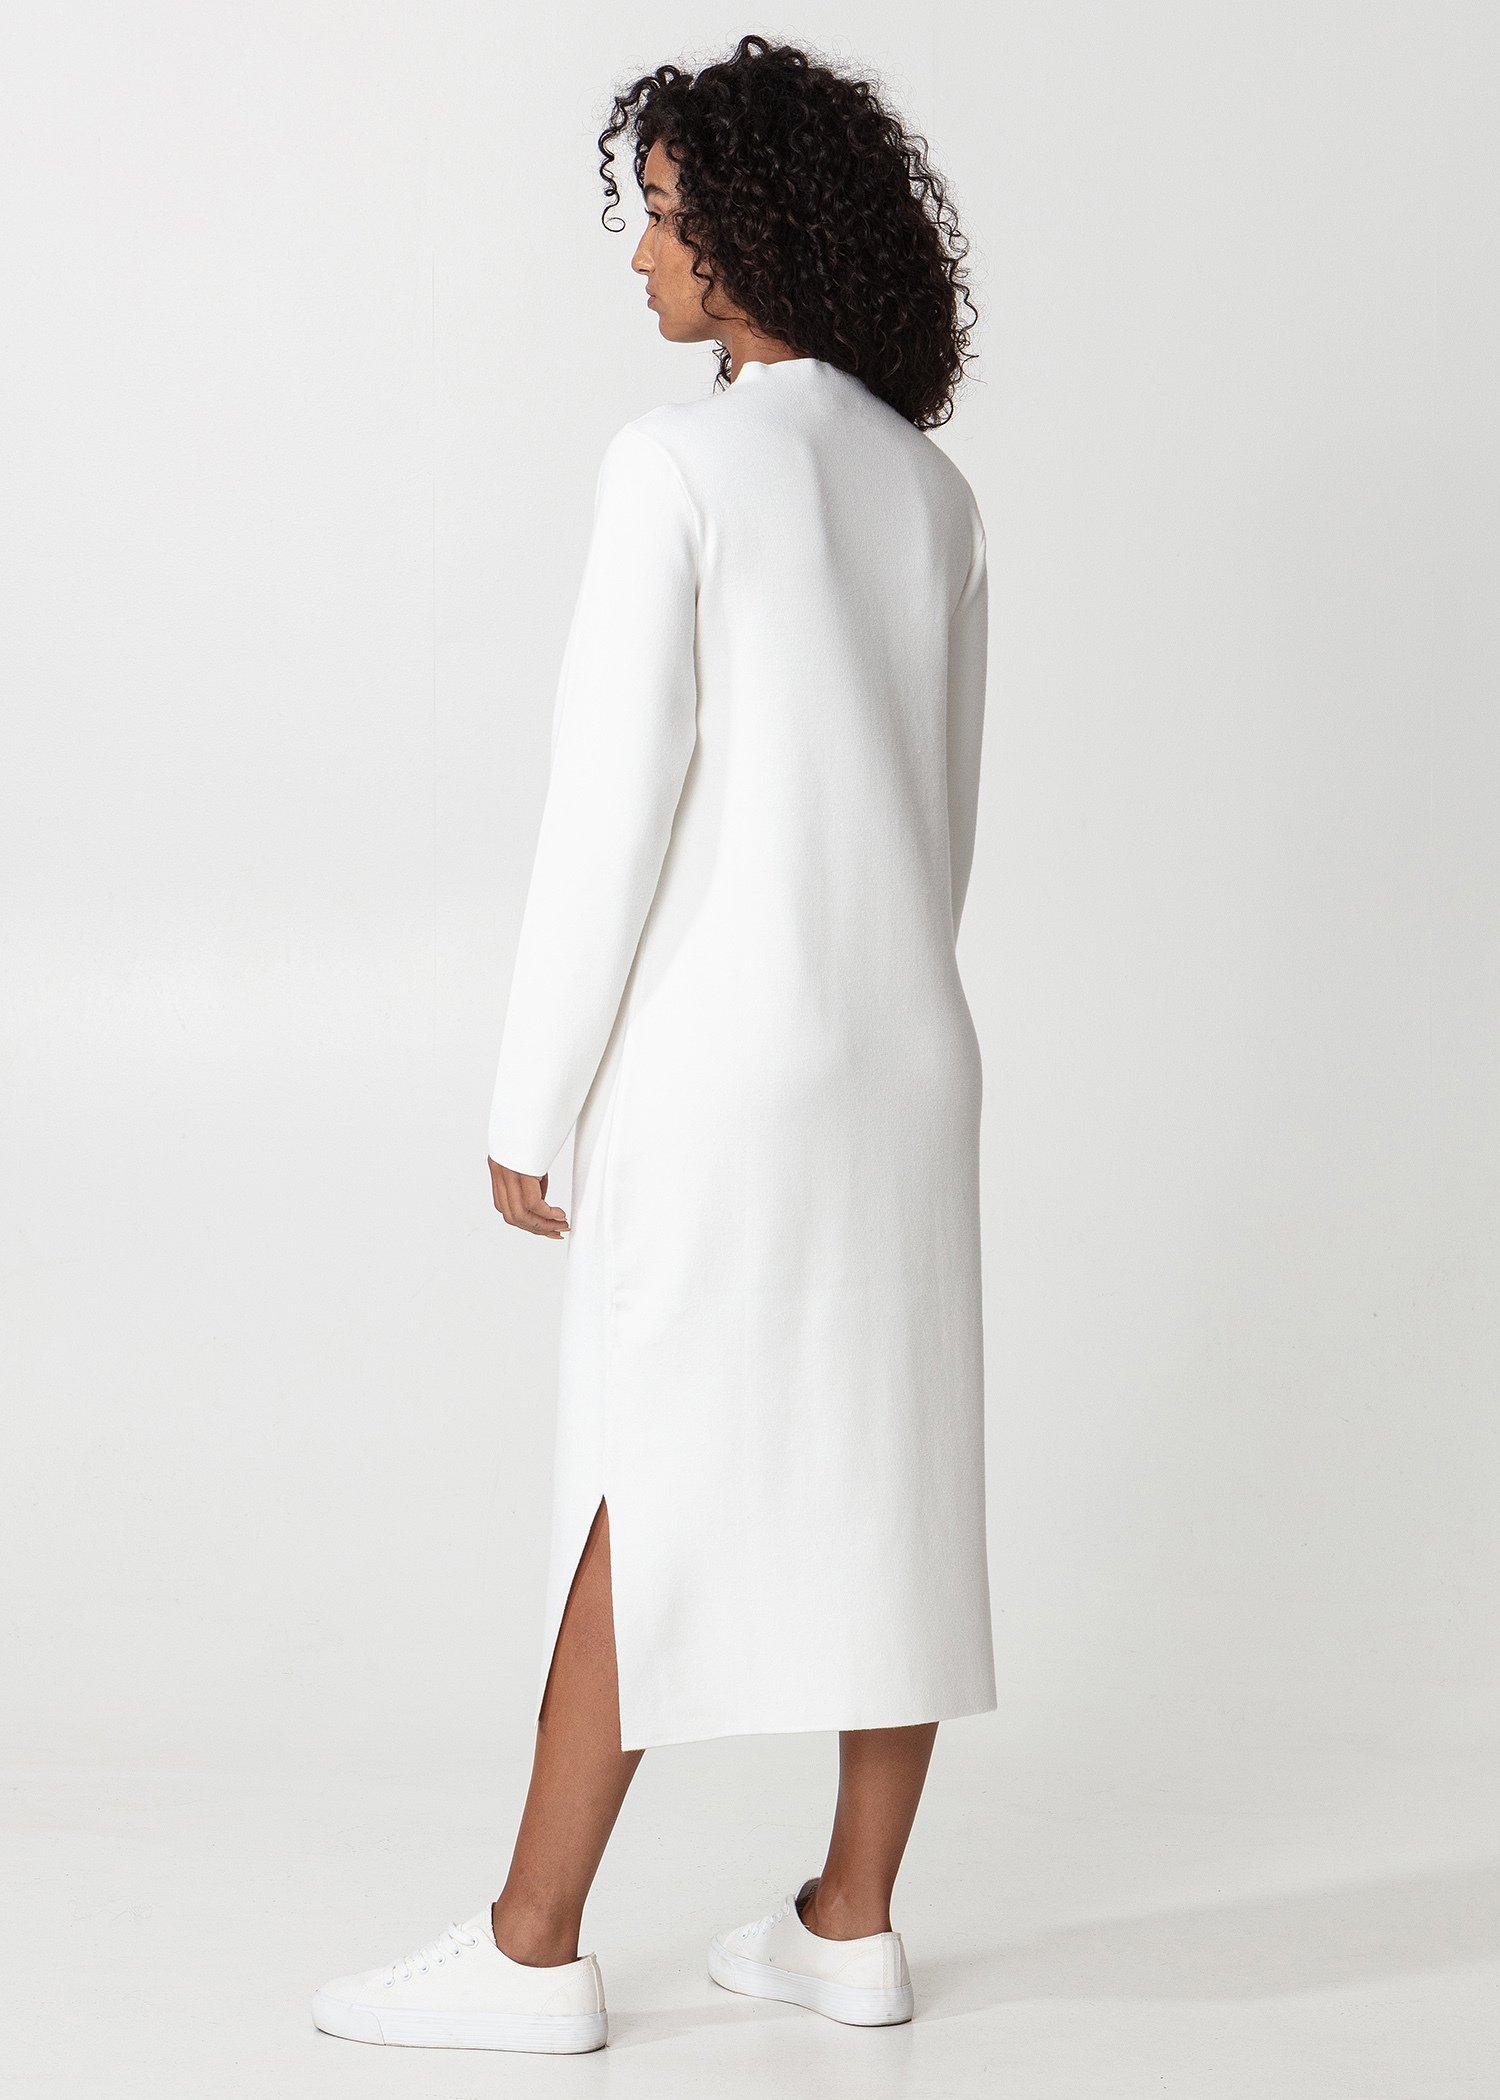 White knitted dress Image 7